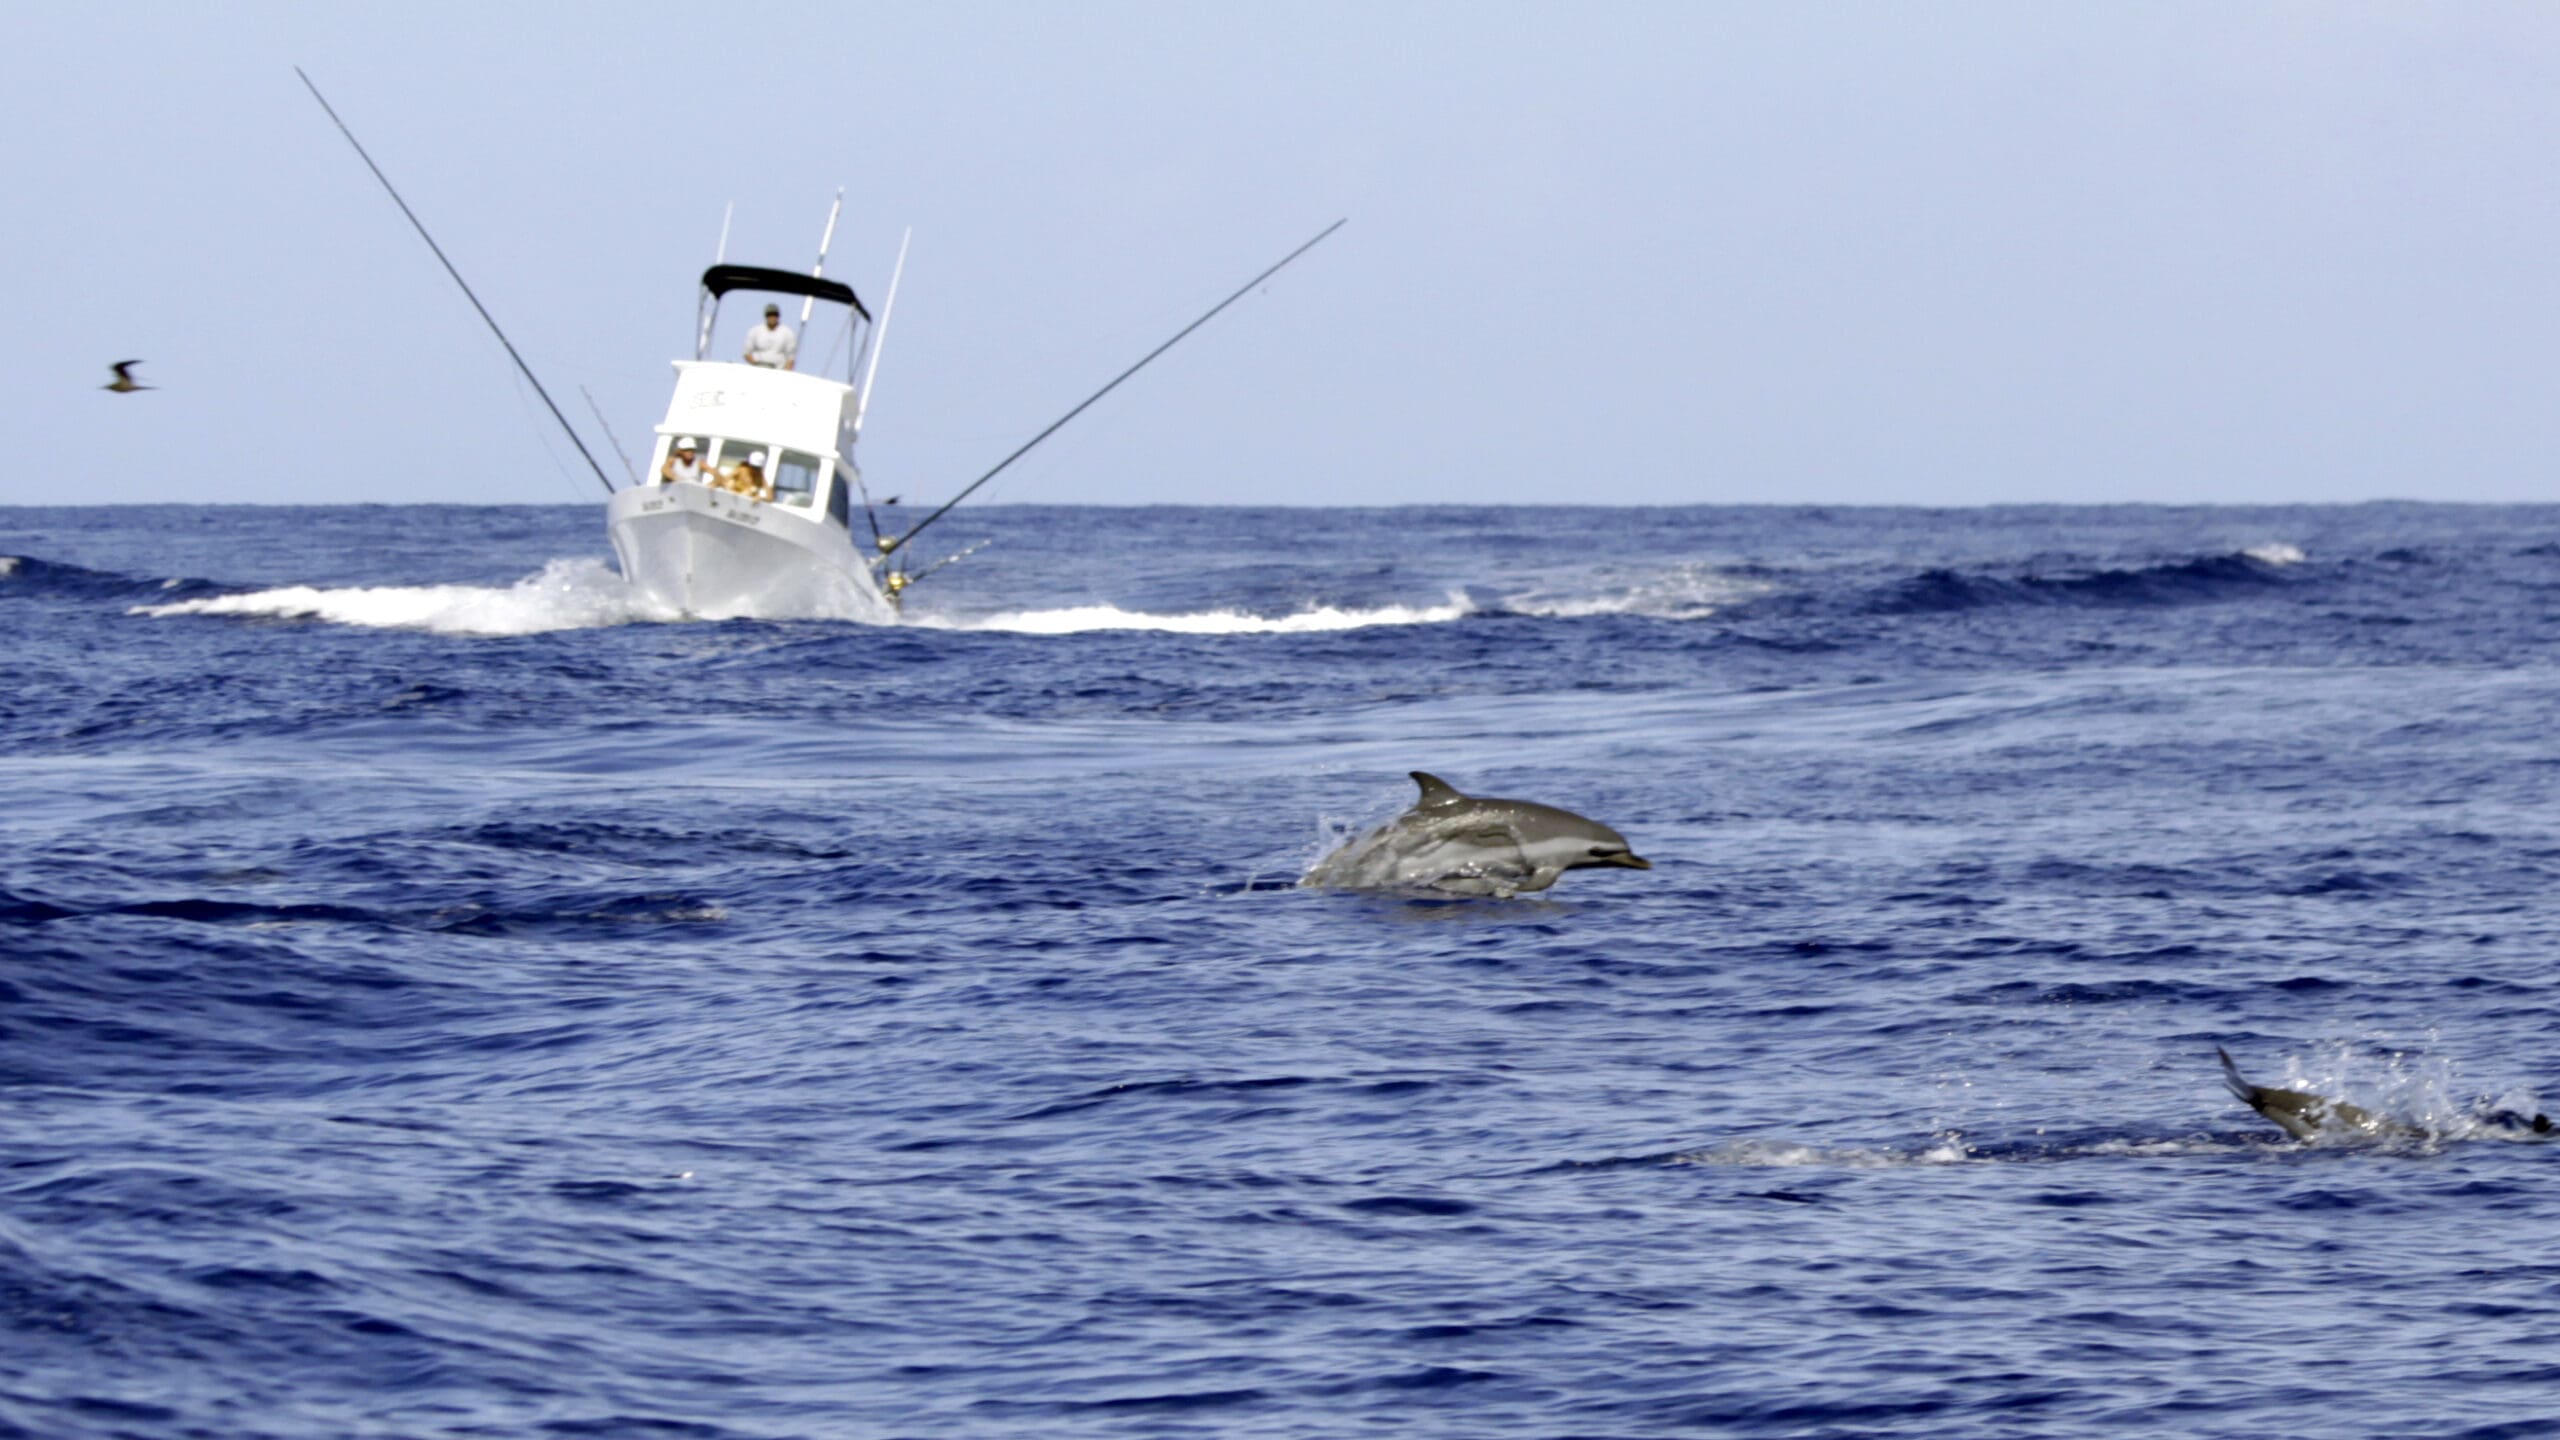 Using dolphins to catch tuna - hook and line fisheries in Hawaii